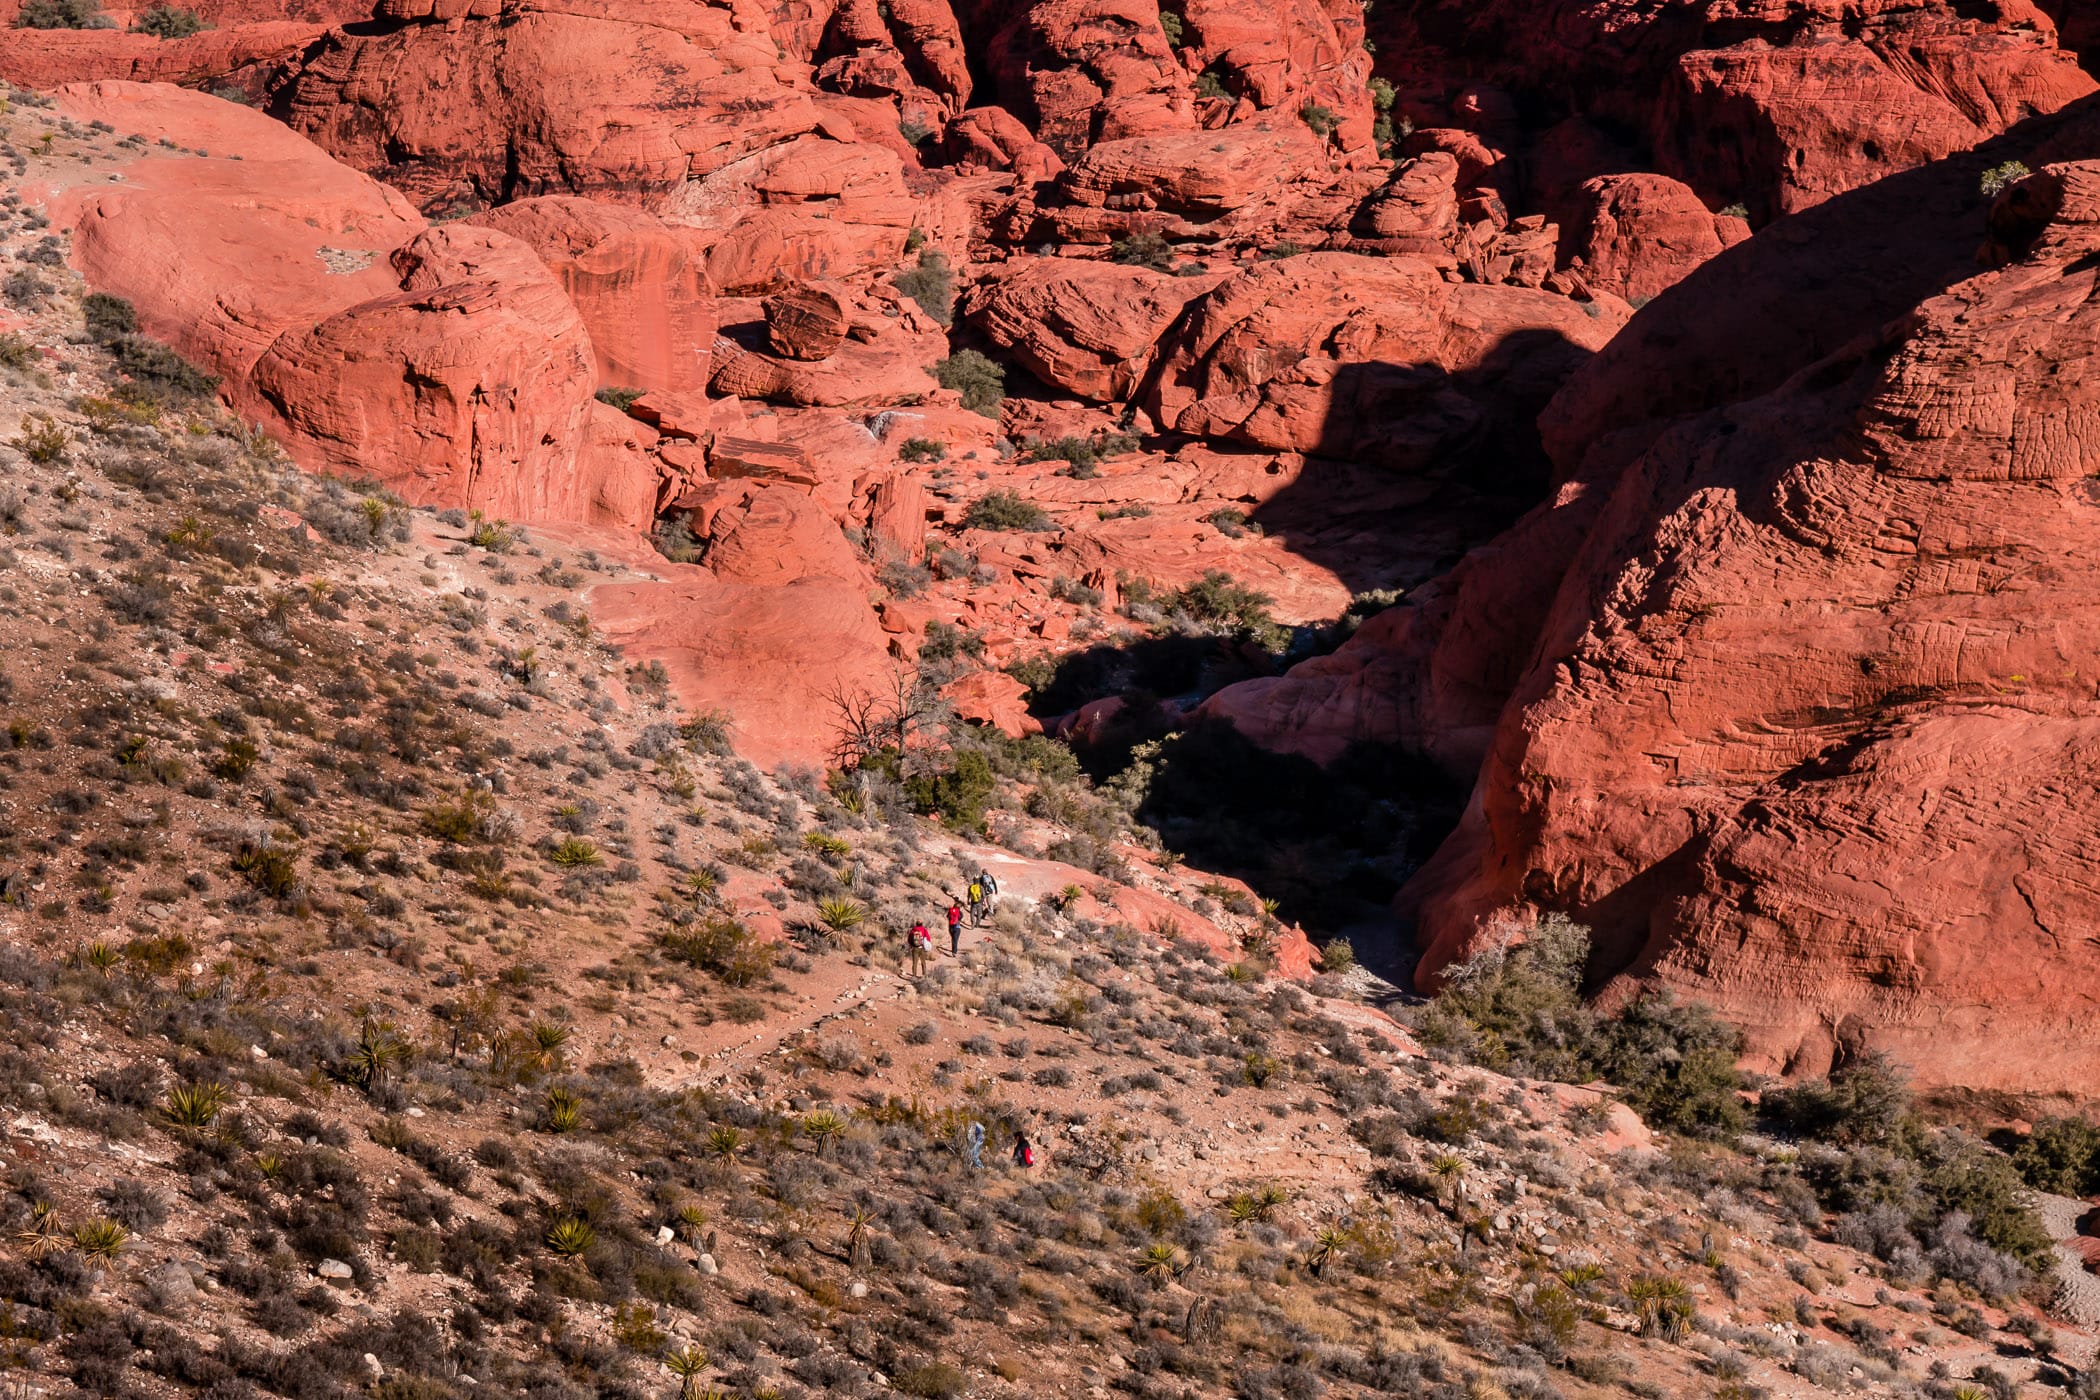 Hikers trek to the bottom of Nevada's sun-parched Red Rock Canyon, on the outskirts of Las Vegas.